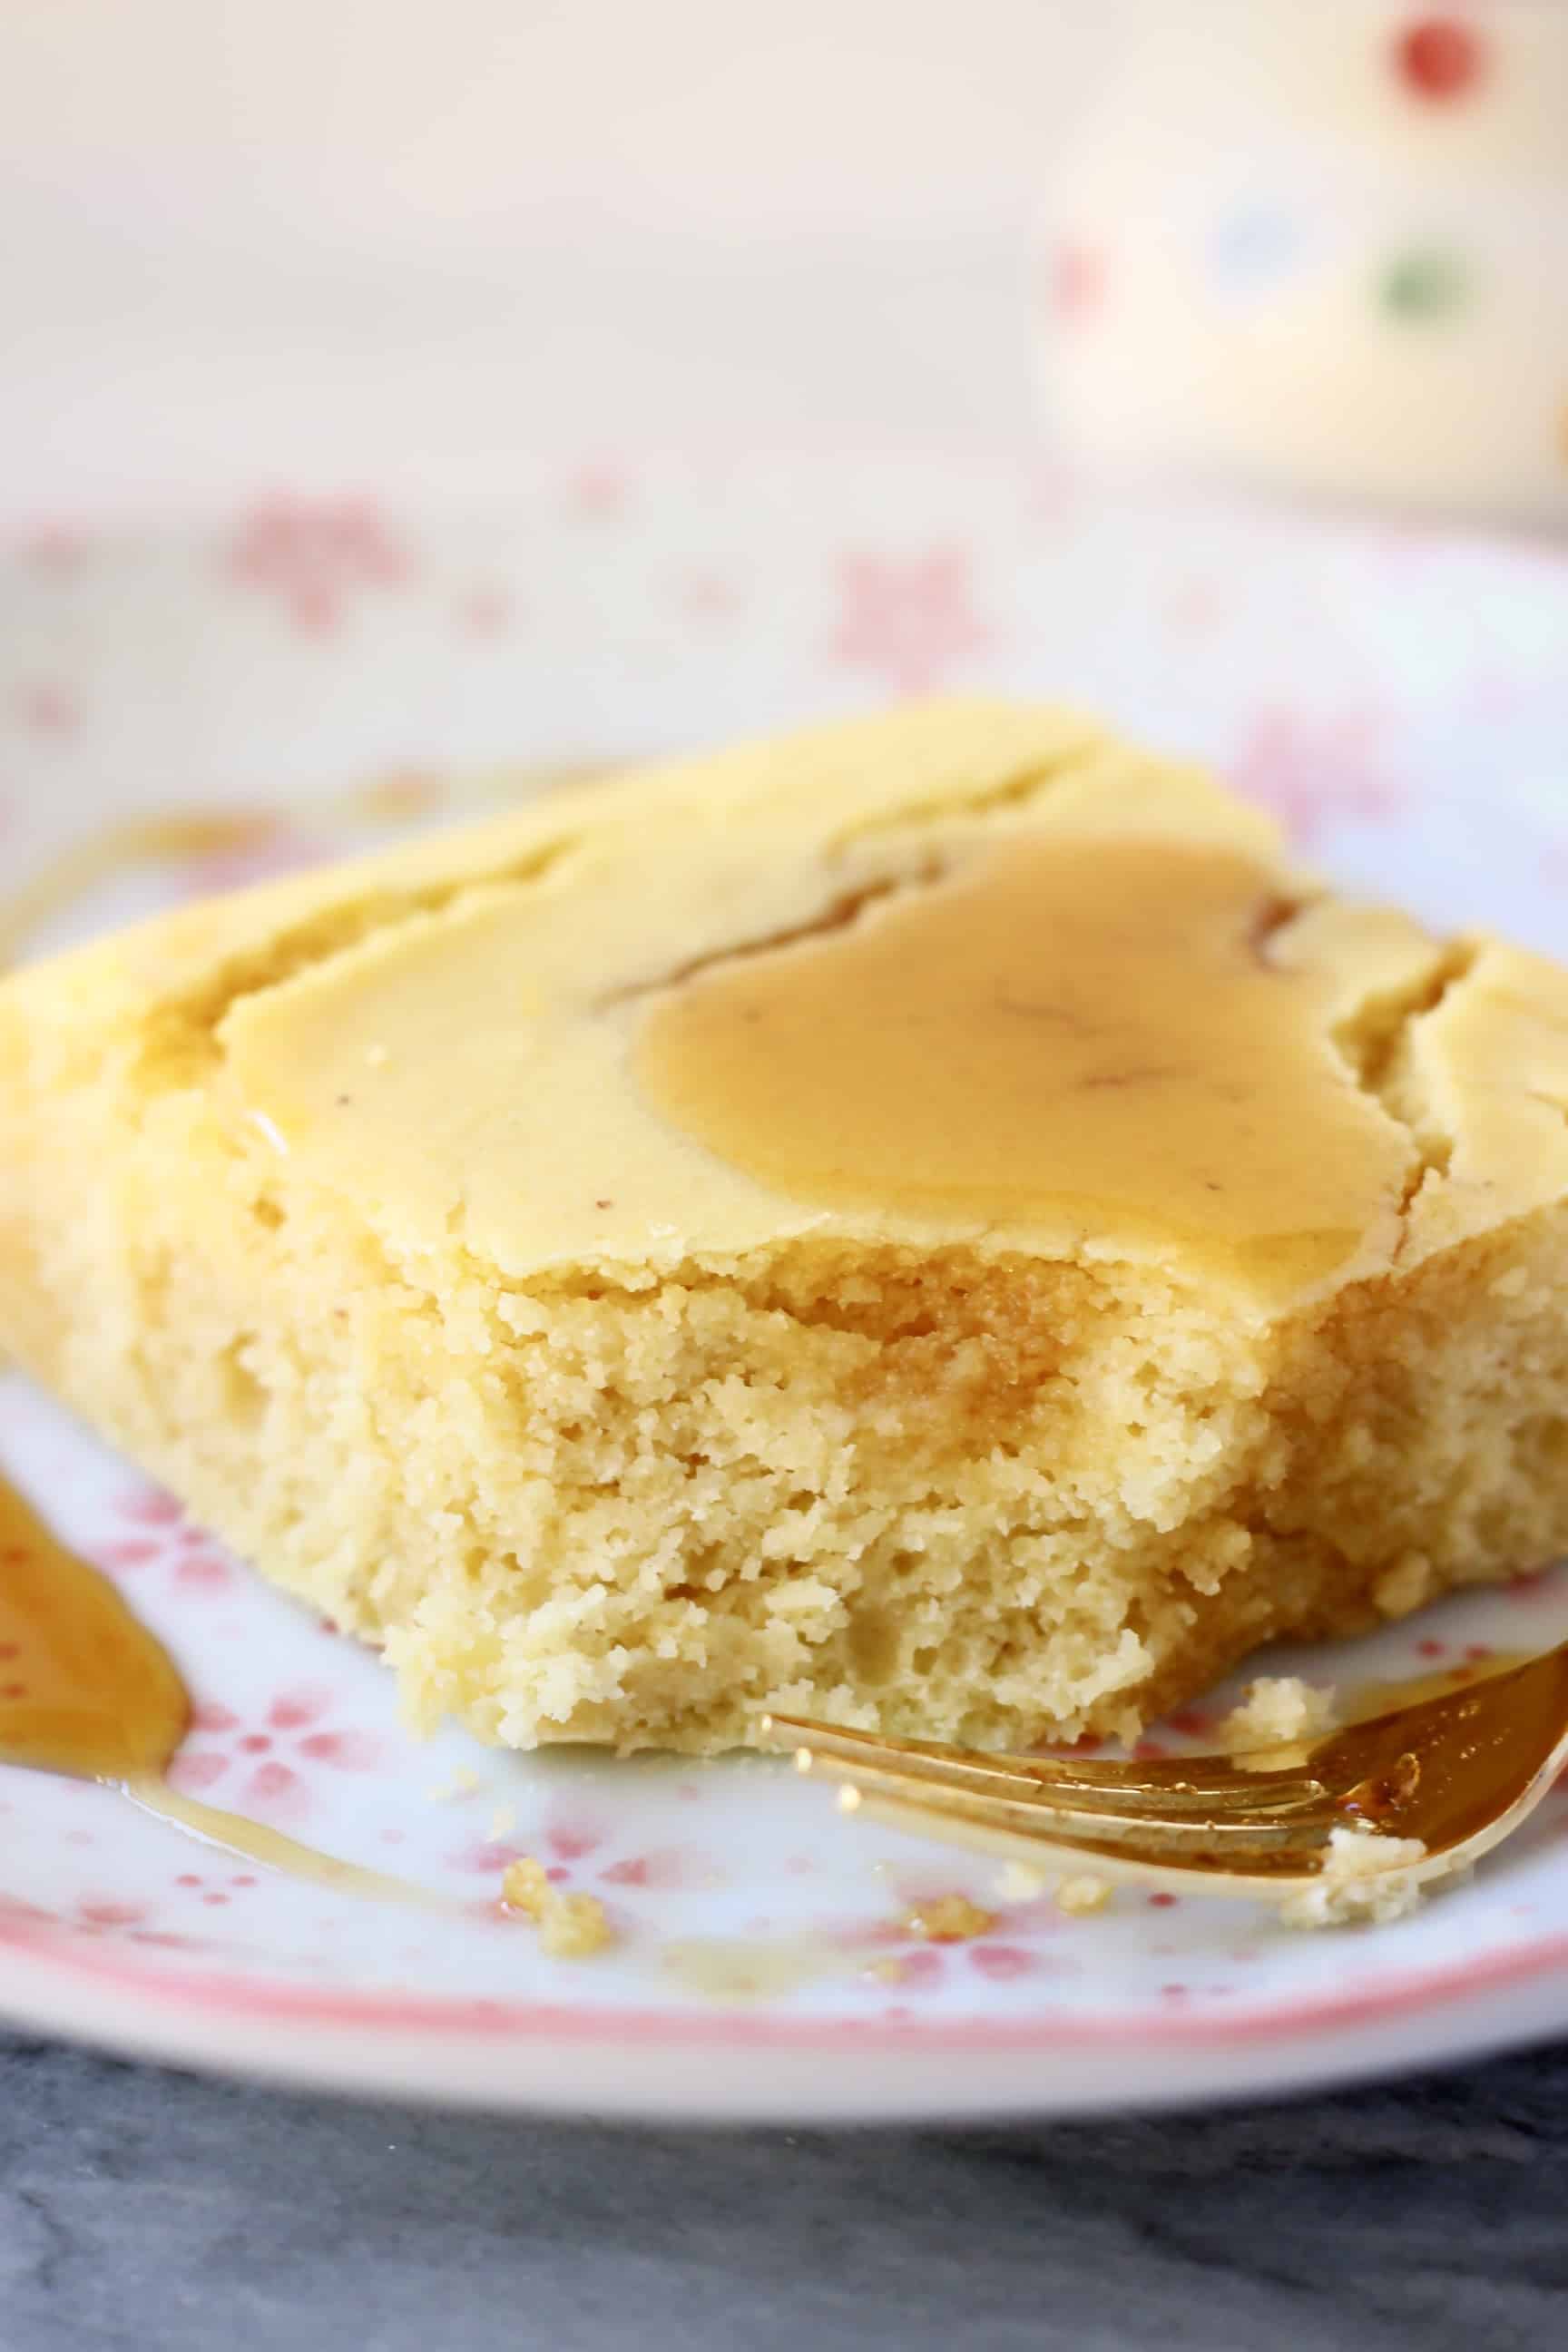 A square of gluten-free vegan cornbread with a bite taken out of it drizzled with maple syrup on a plate with a fork